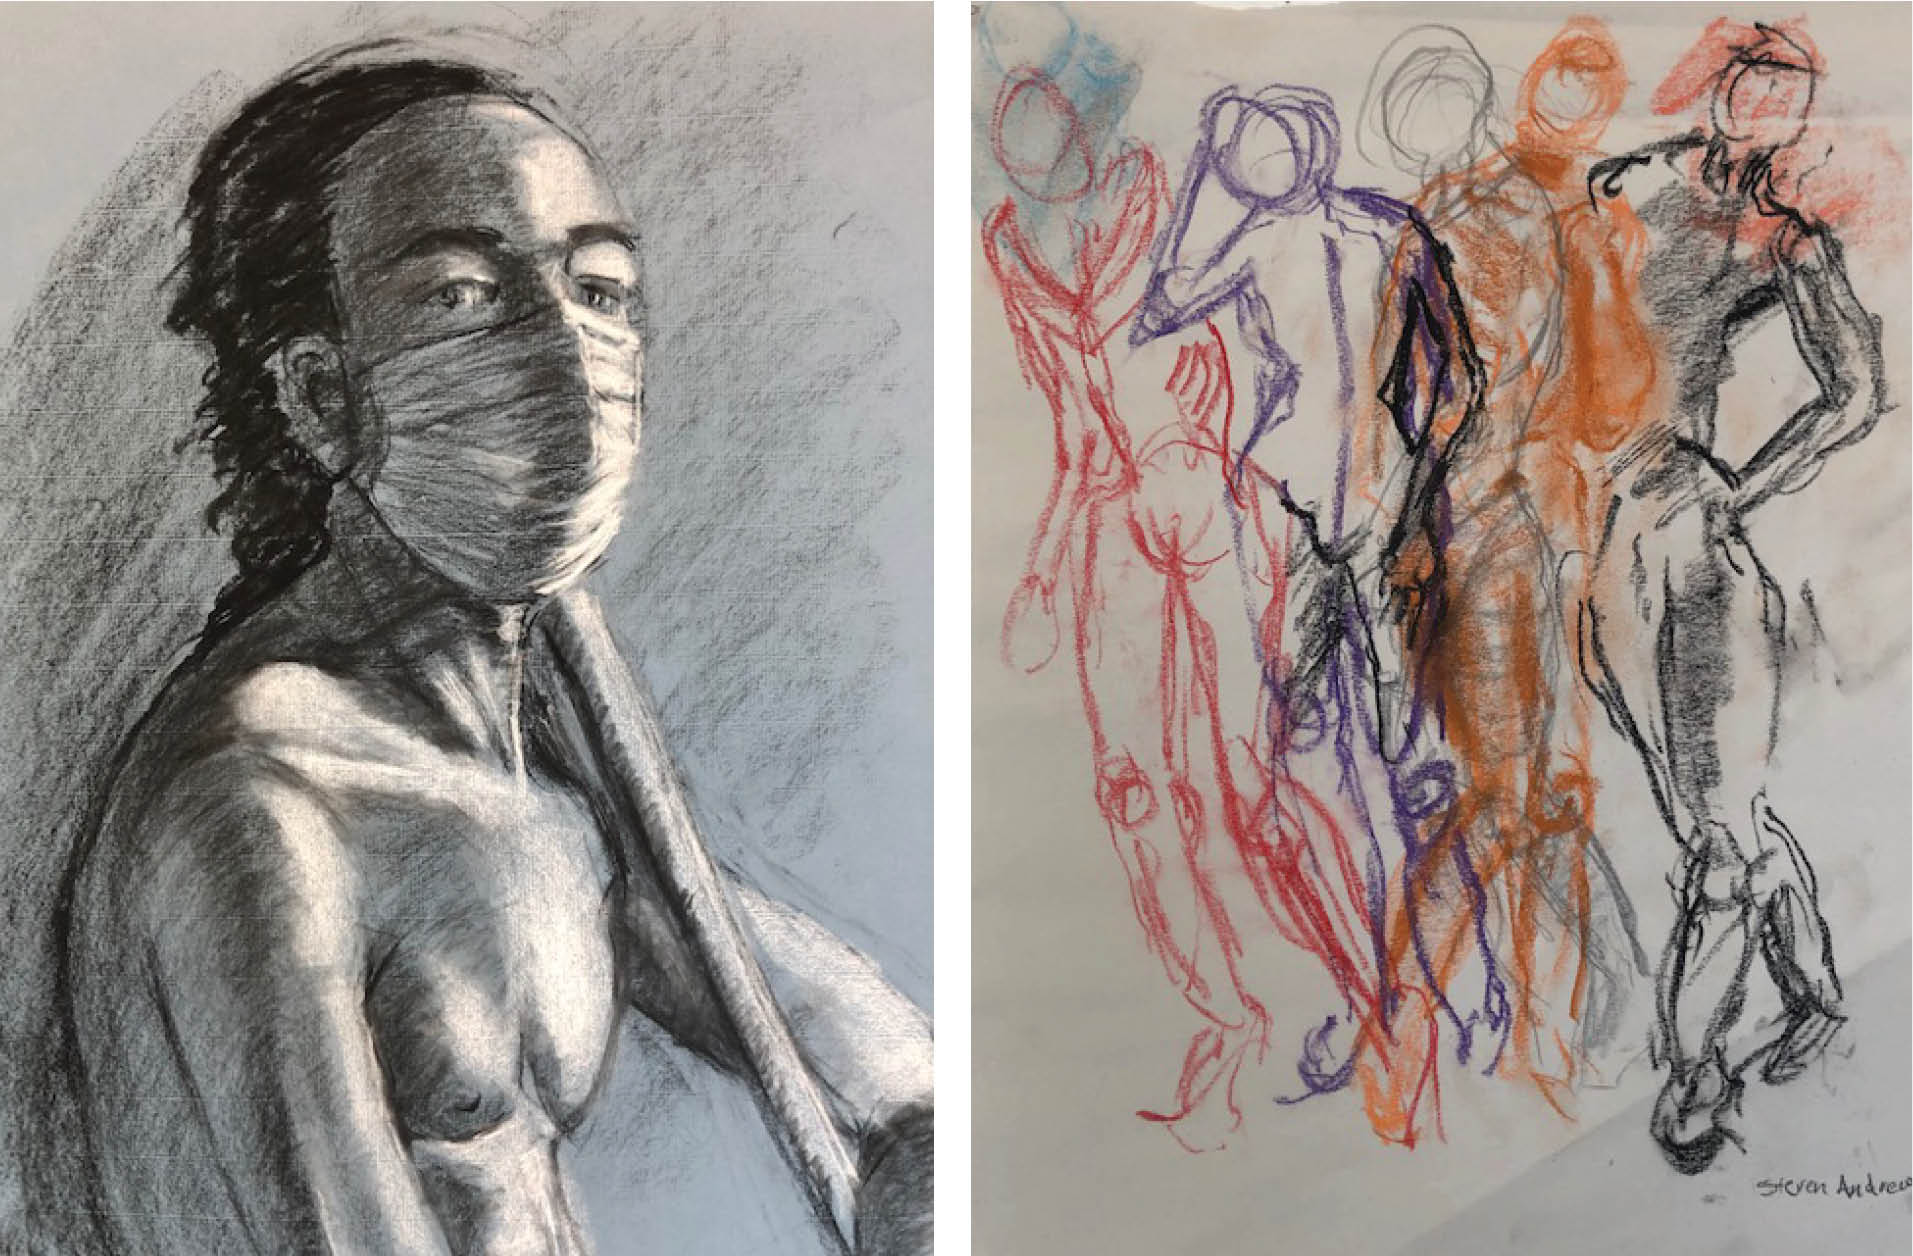 Studio Exhibition: Students of Sarah Kaiser-Amaral, featuring drawings on paper by (L to R): Julie Gordon, "Dalawn in a Mask";  Steven Andrews, "Gesture Drawing"